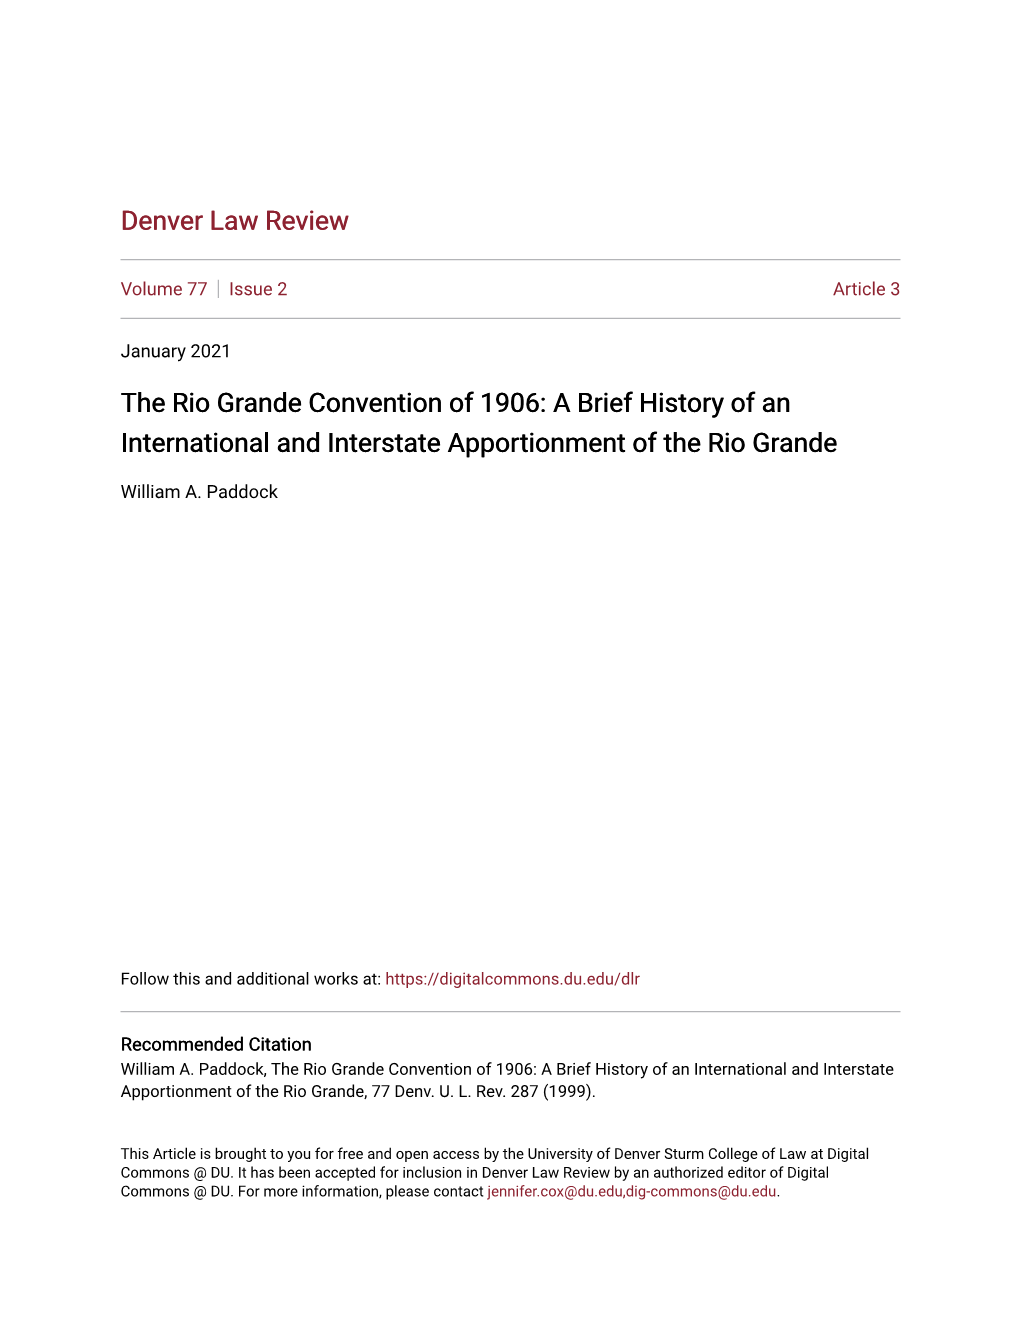 The Rio Grande Convention of 1906: a Brief History of an International and Interstate Apportionment of the Rio Grande